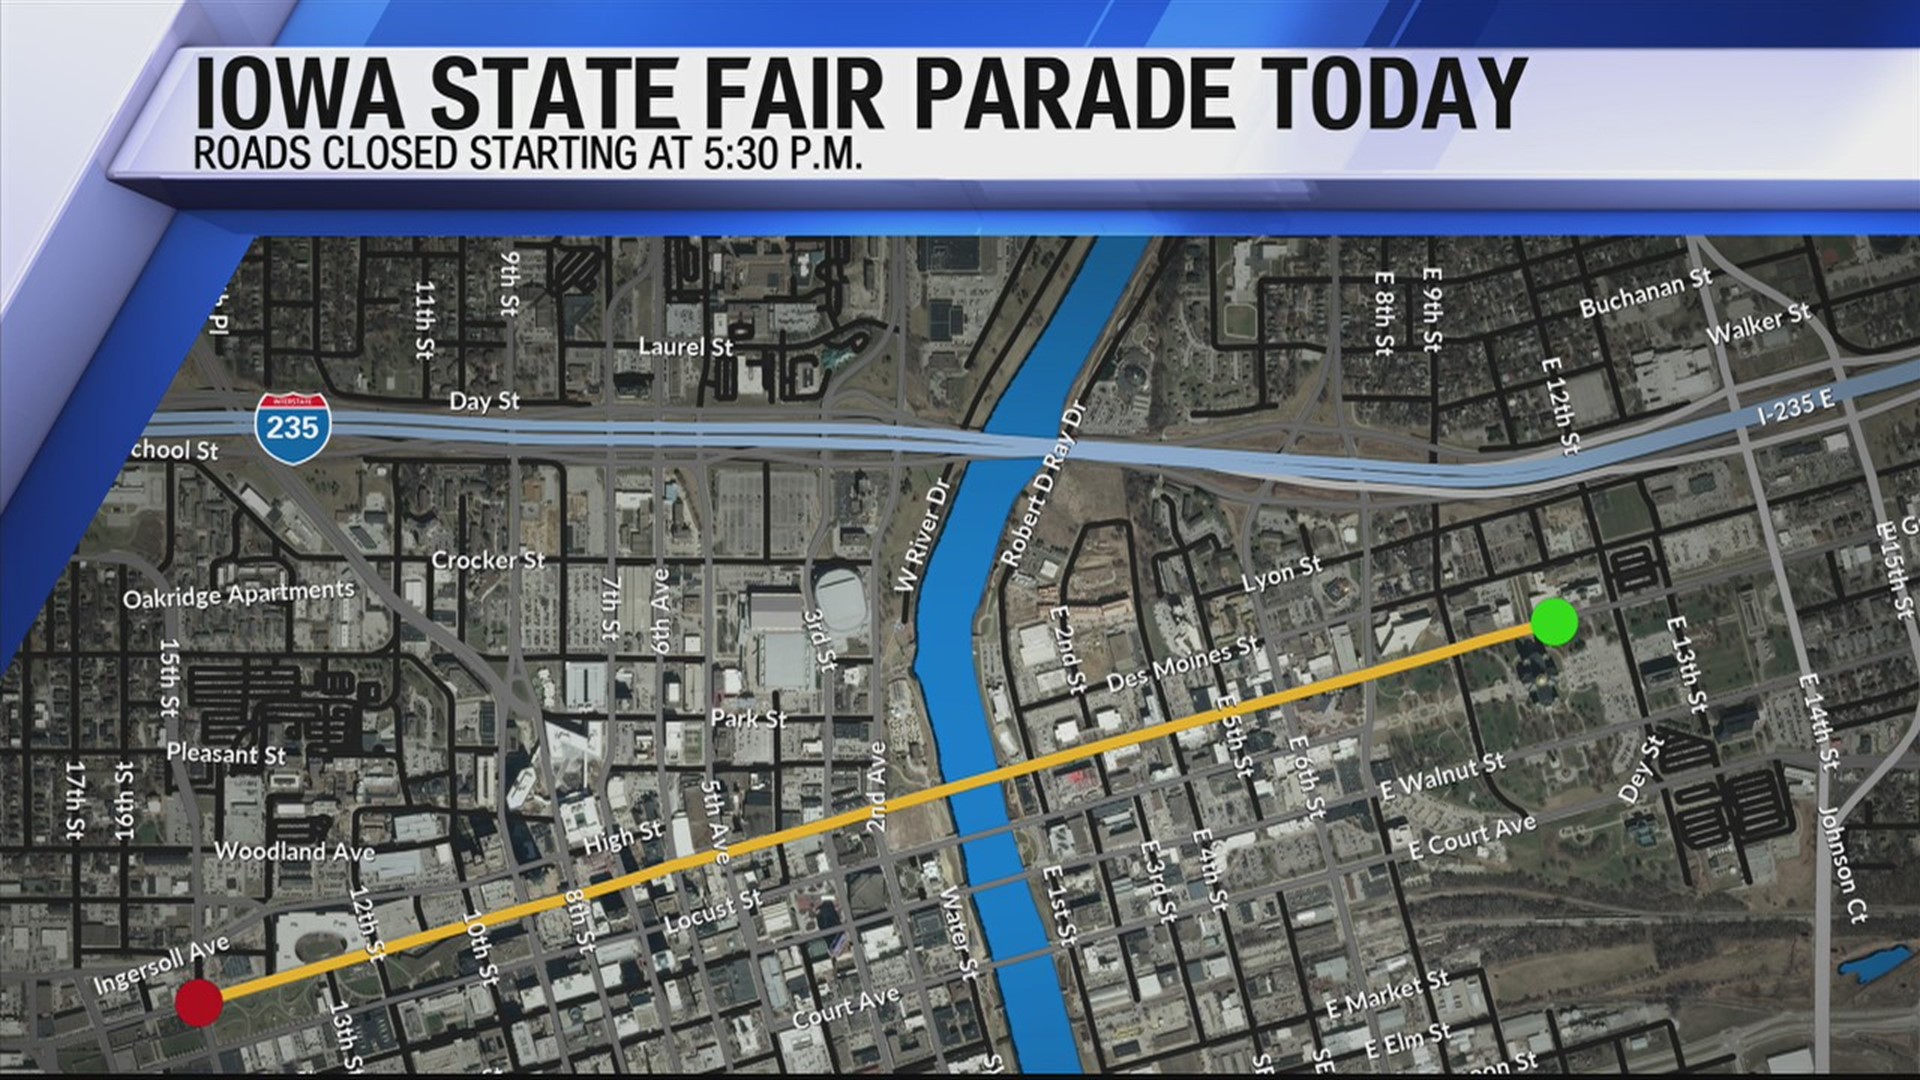 Iowa State Fair parade happening today